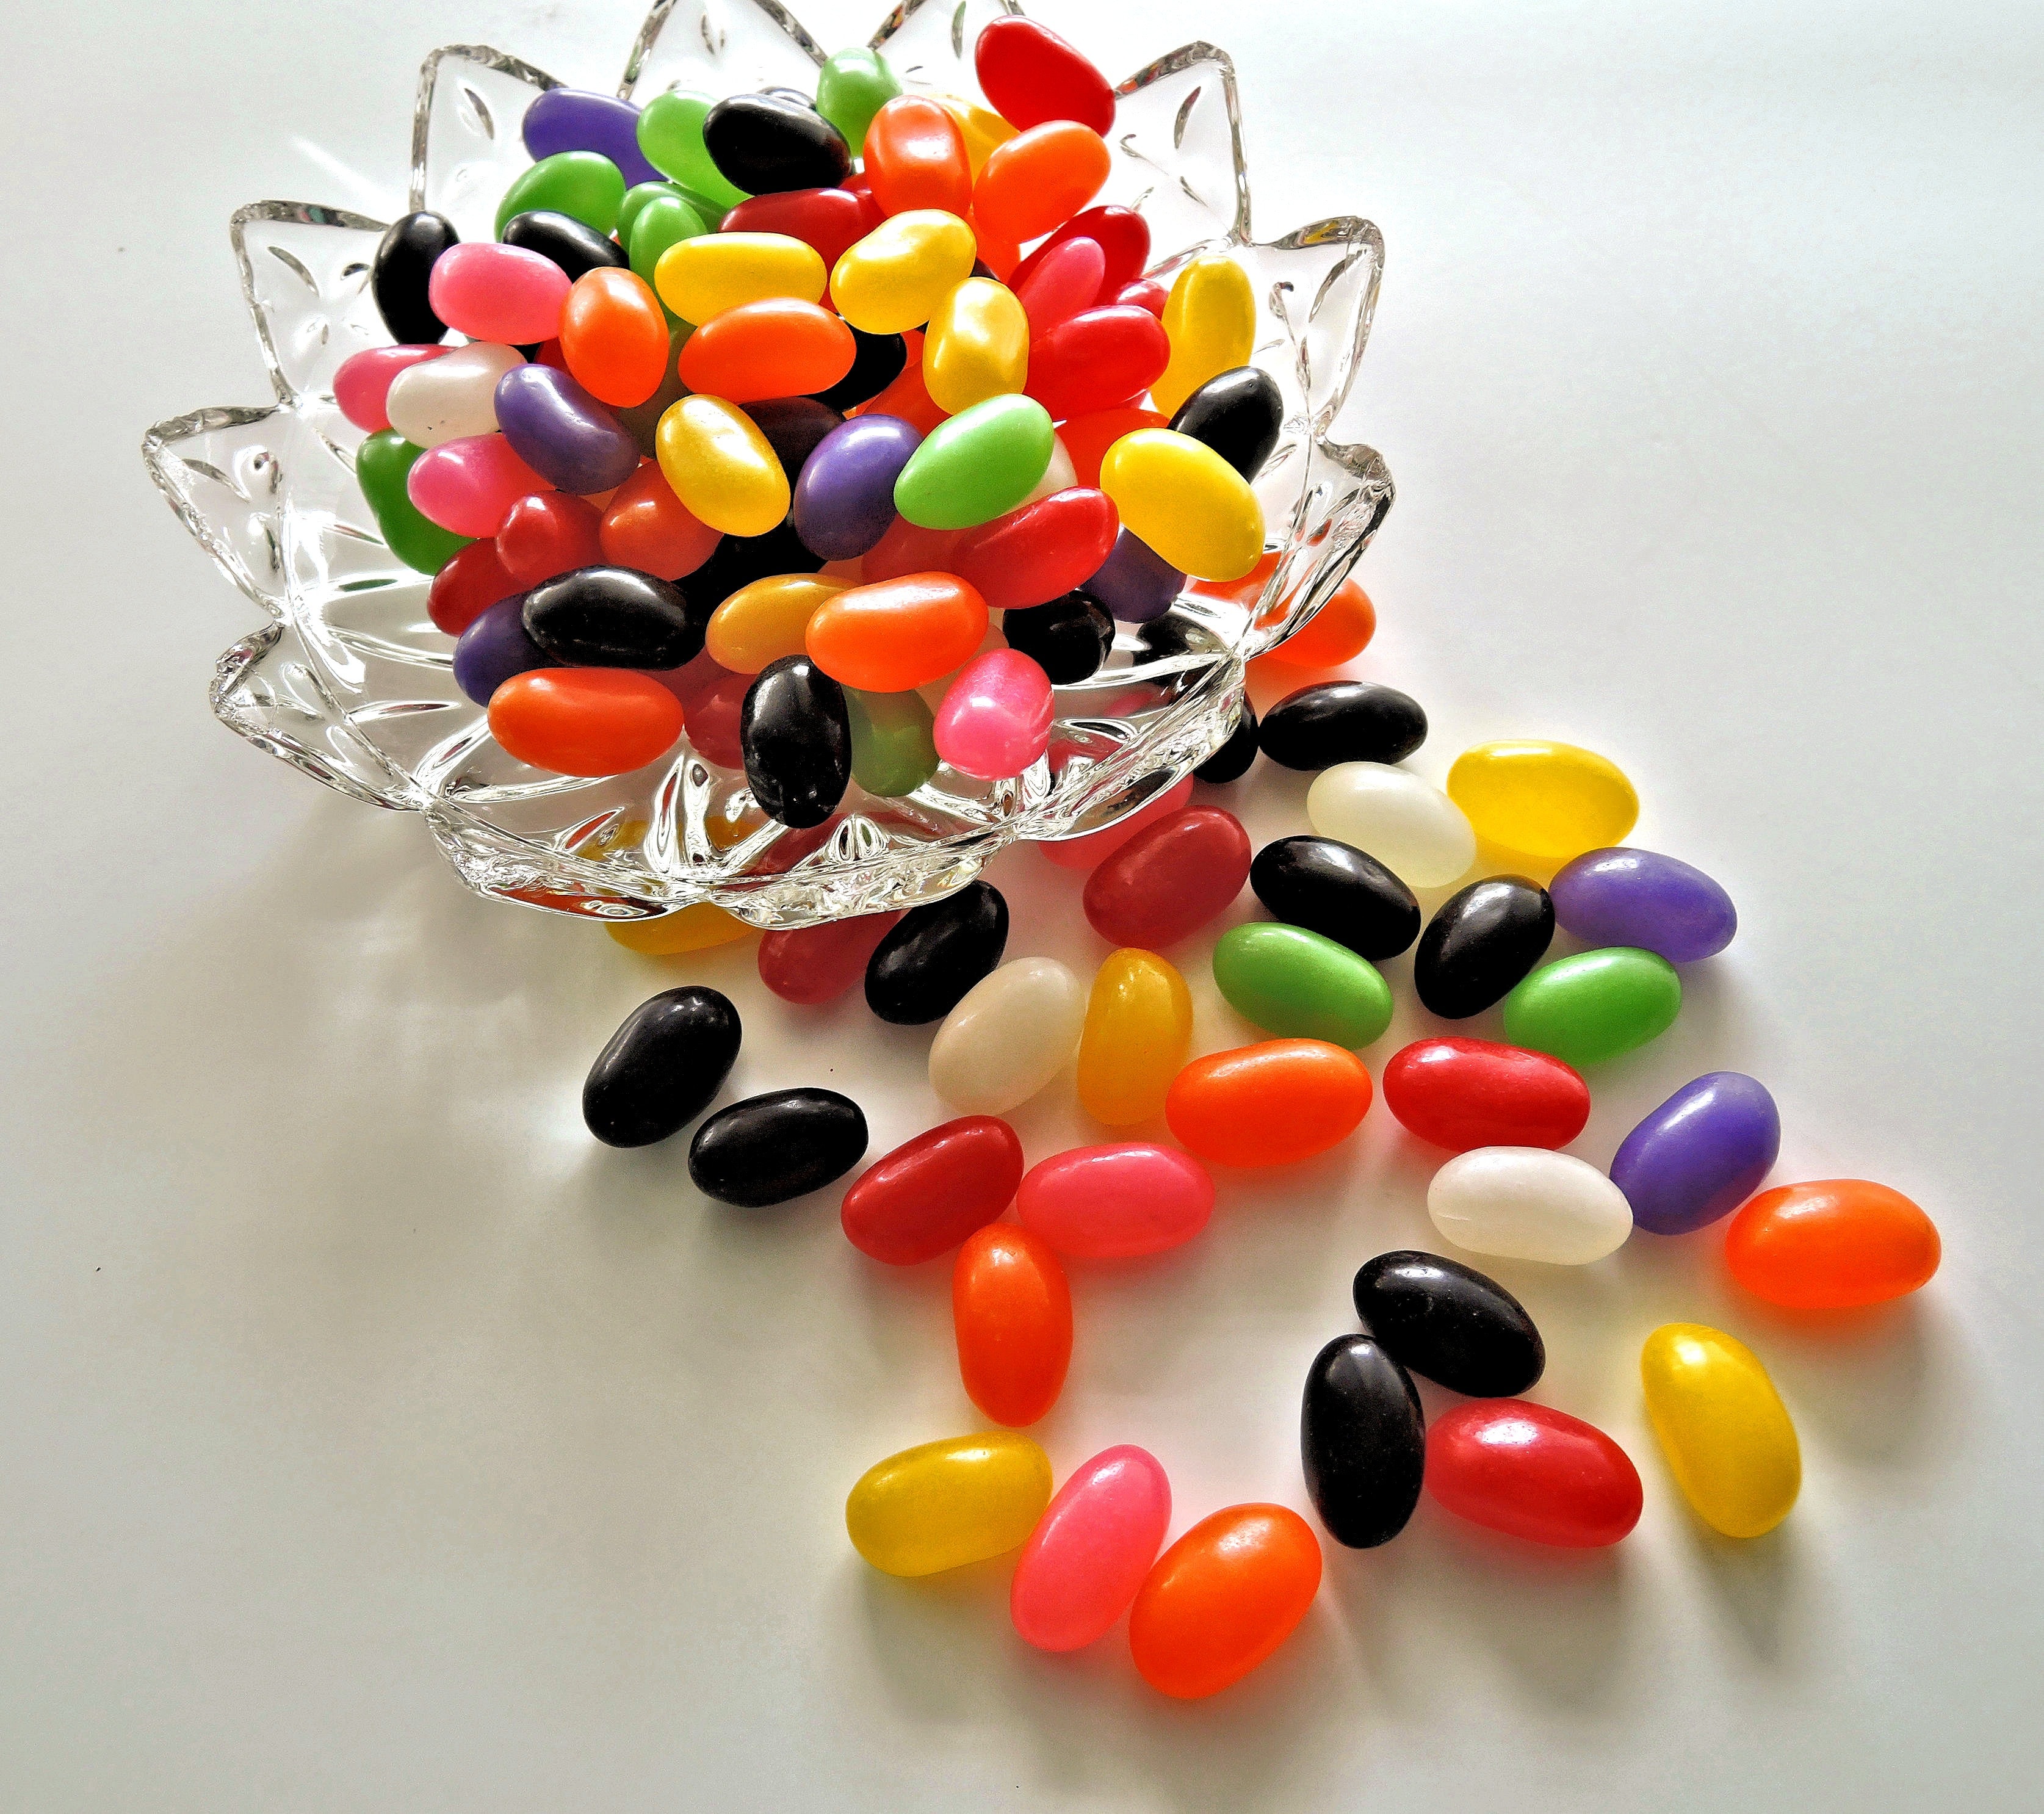 assorted color jelly beans on clear cut crystal glass bowl